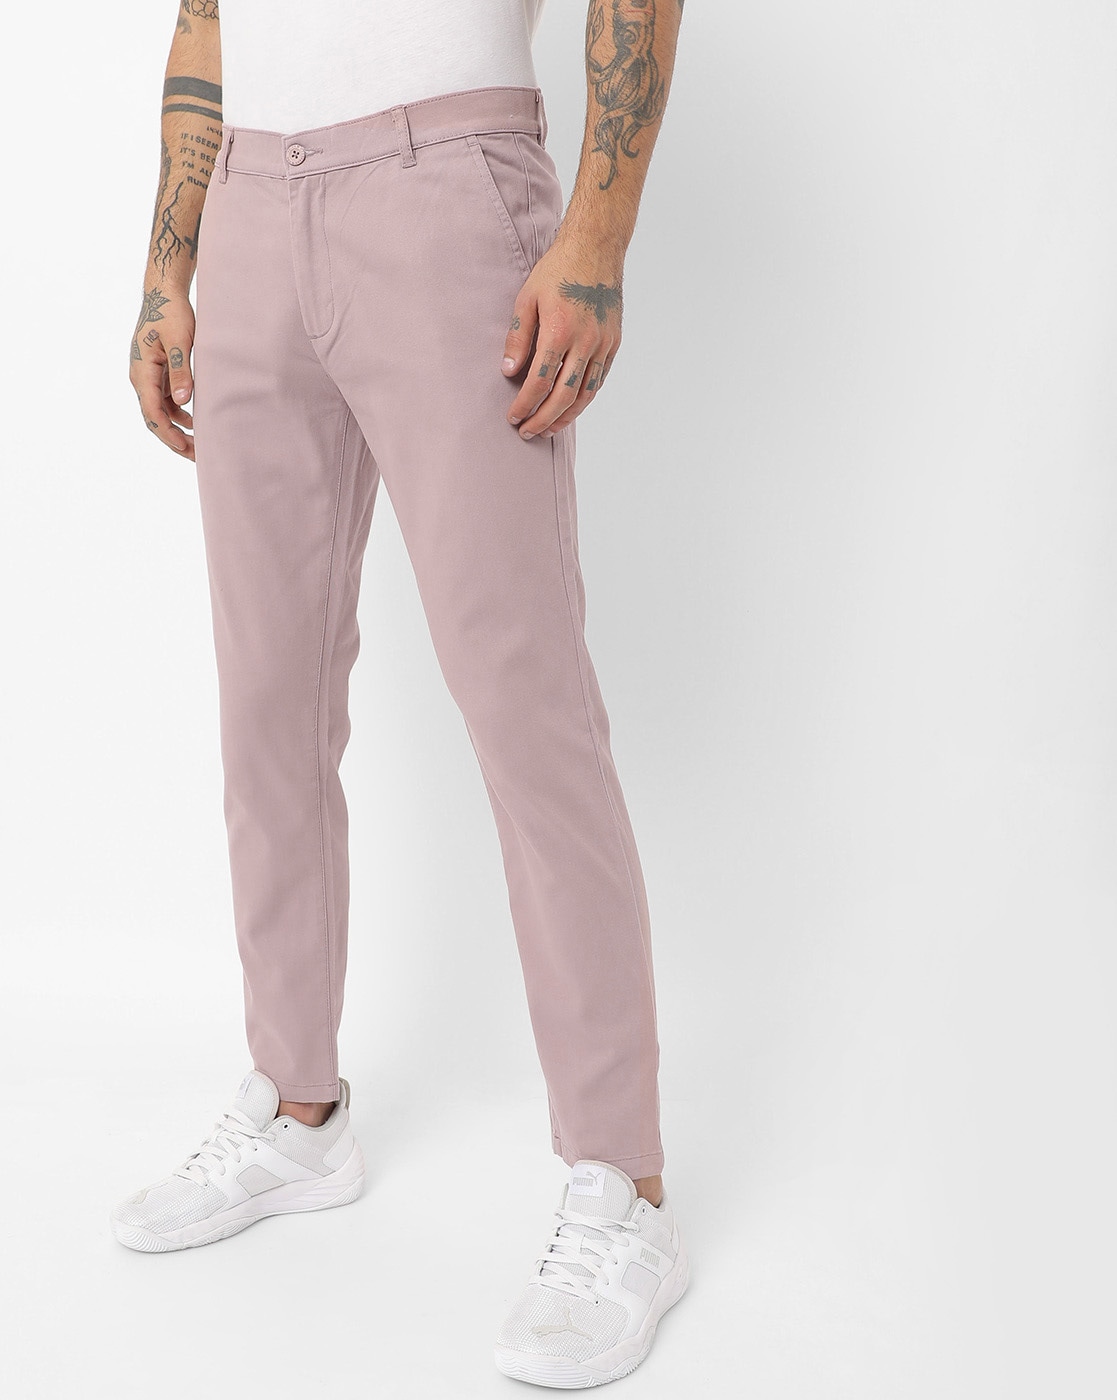 Buy Pink Trousers  Pants for Men by BROOKS BROTHERS Online  Ajiocom